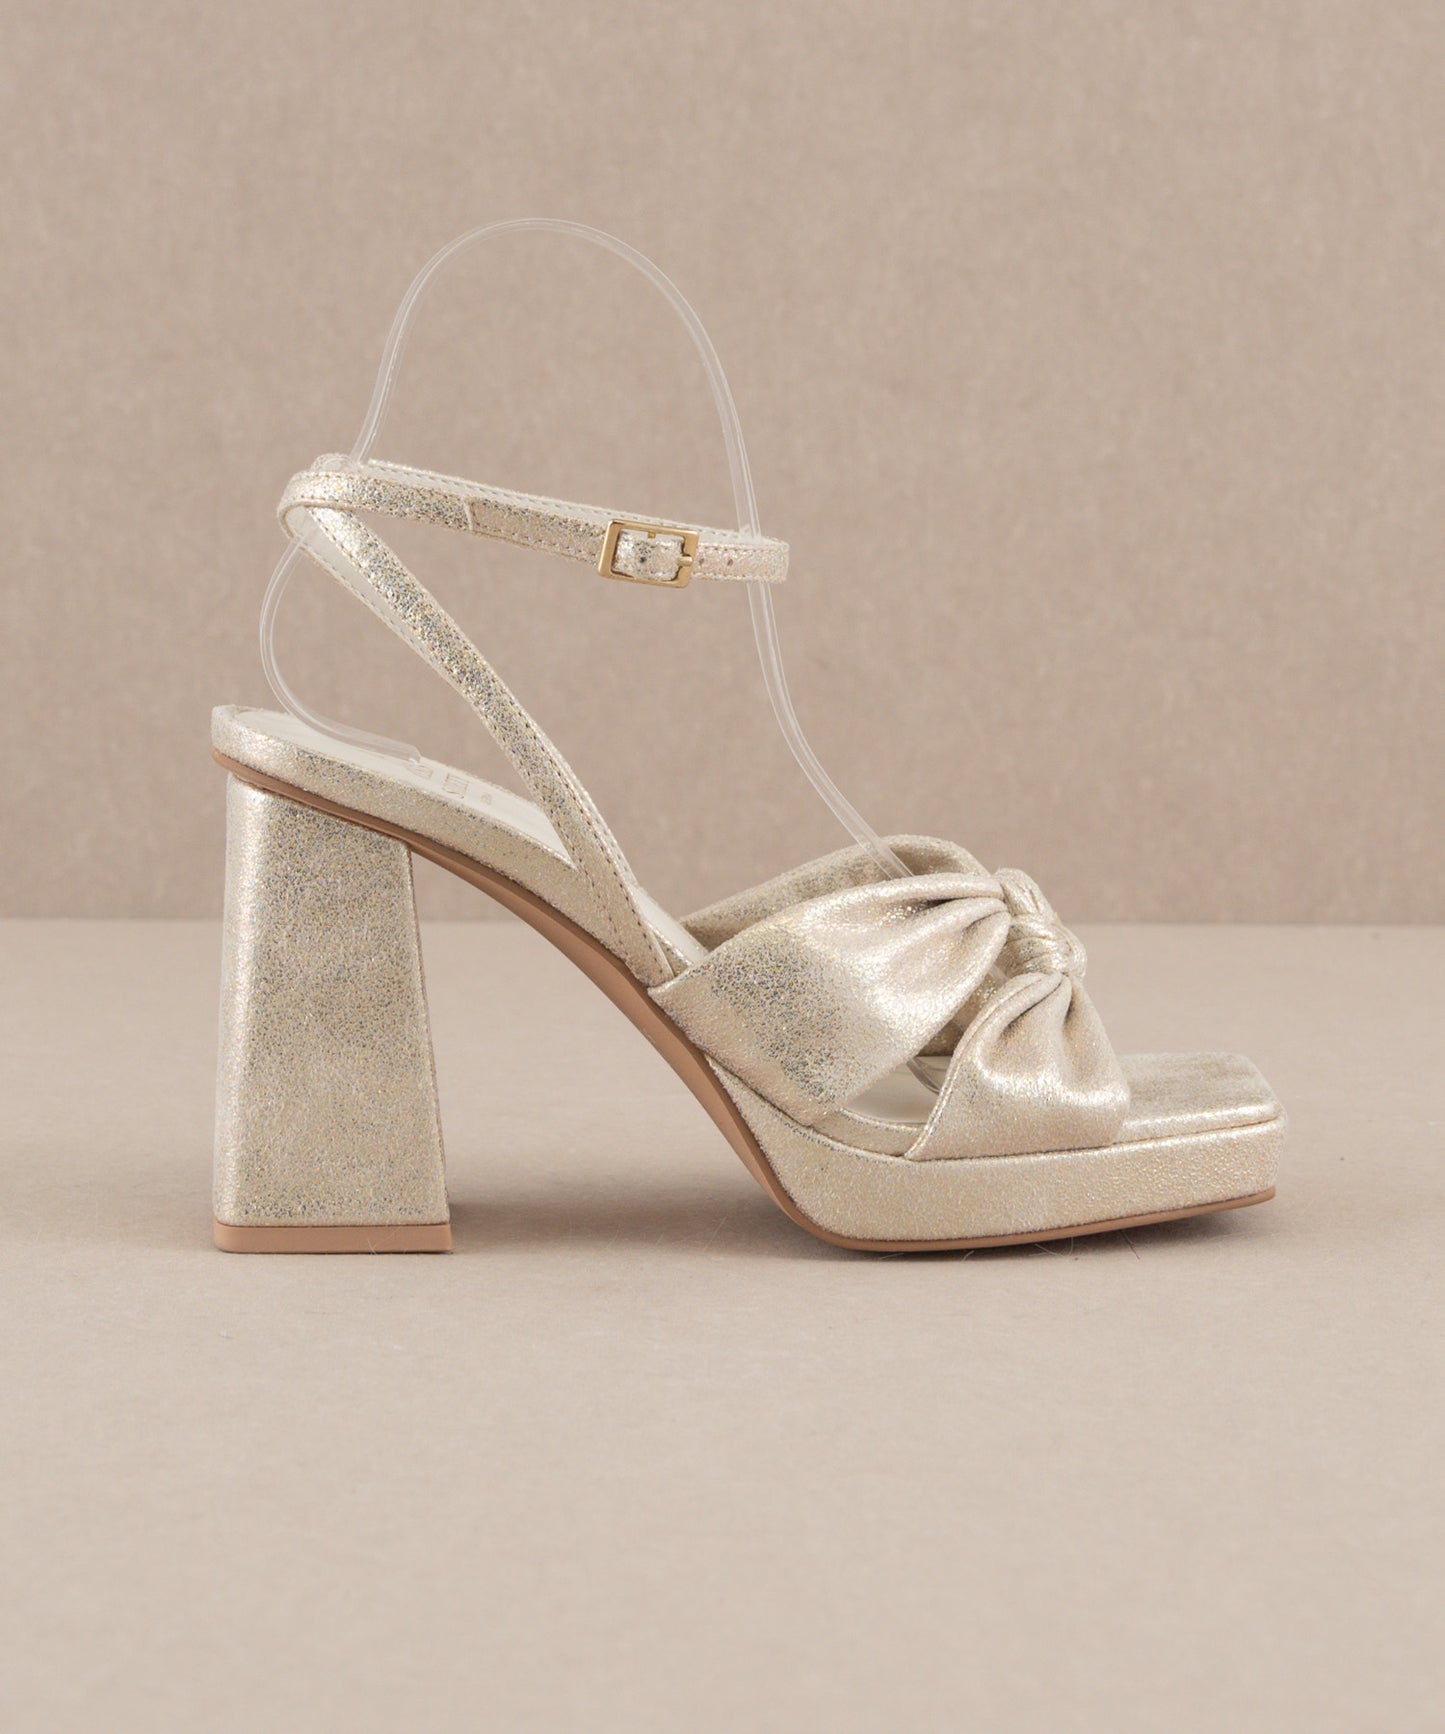 The Zoey - Light Gold knotted band platform  heel